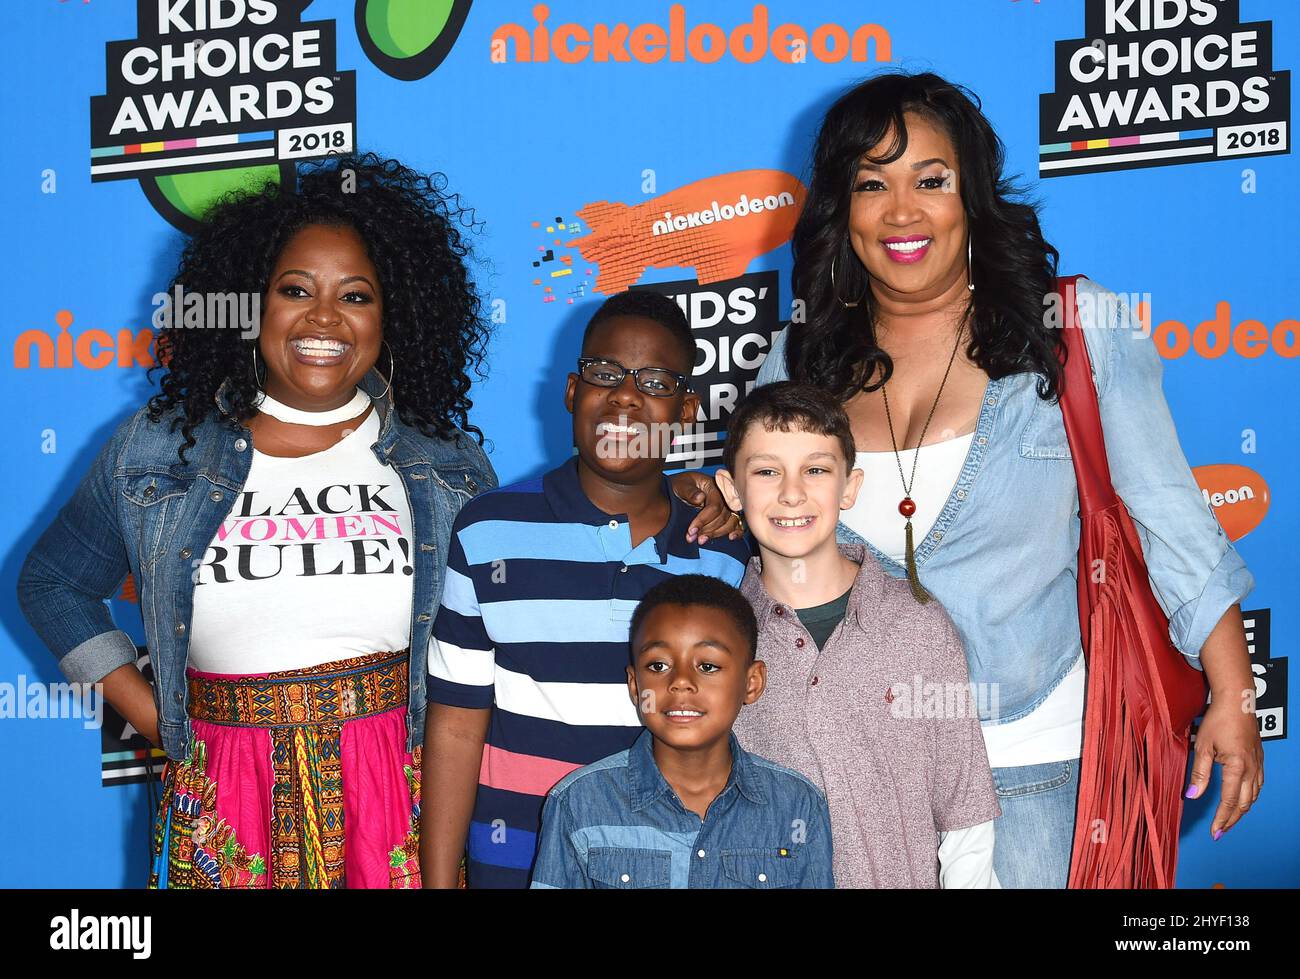 Sherri Shepherd, Kym Whitley and Joshua Kaleb Whitley at Nickelodeon's 2018 Kids' Choice Awards held at The Forum on March 24, 2018 in Los Angeles, Ca Stock Photo